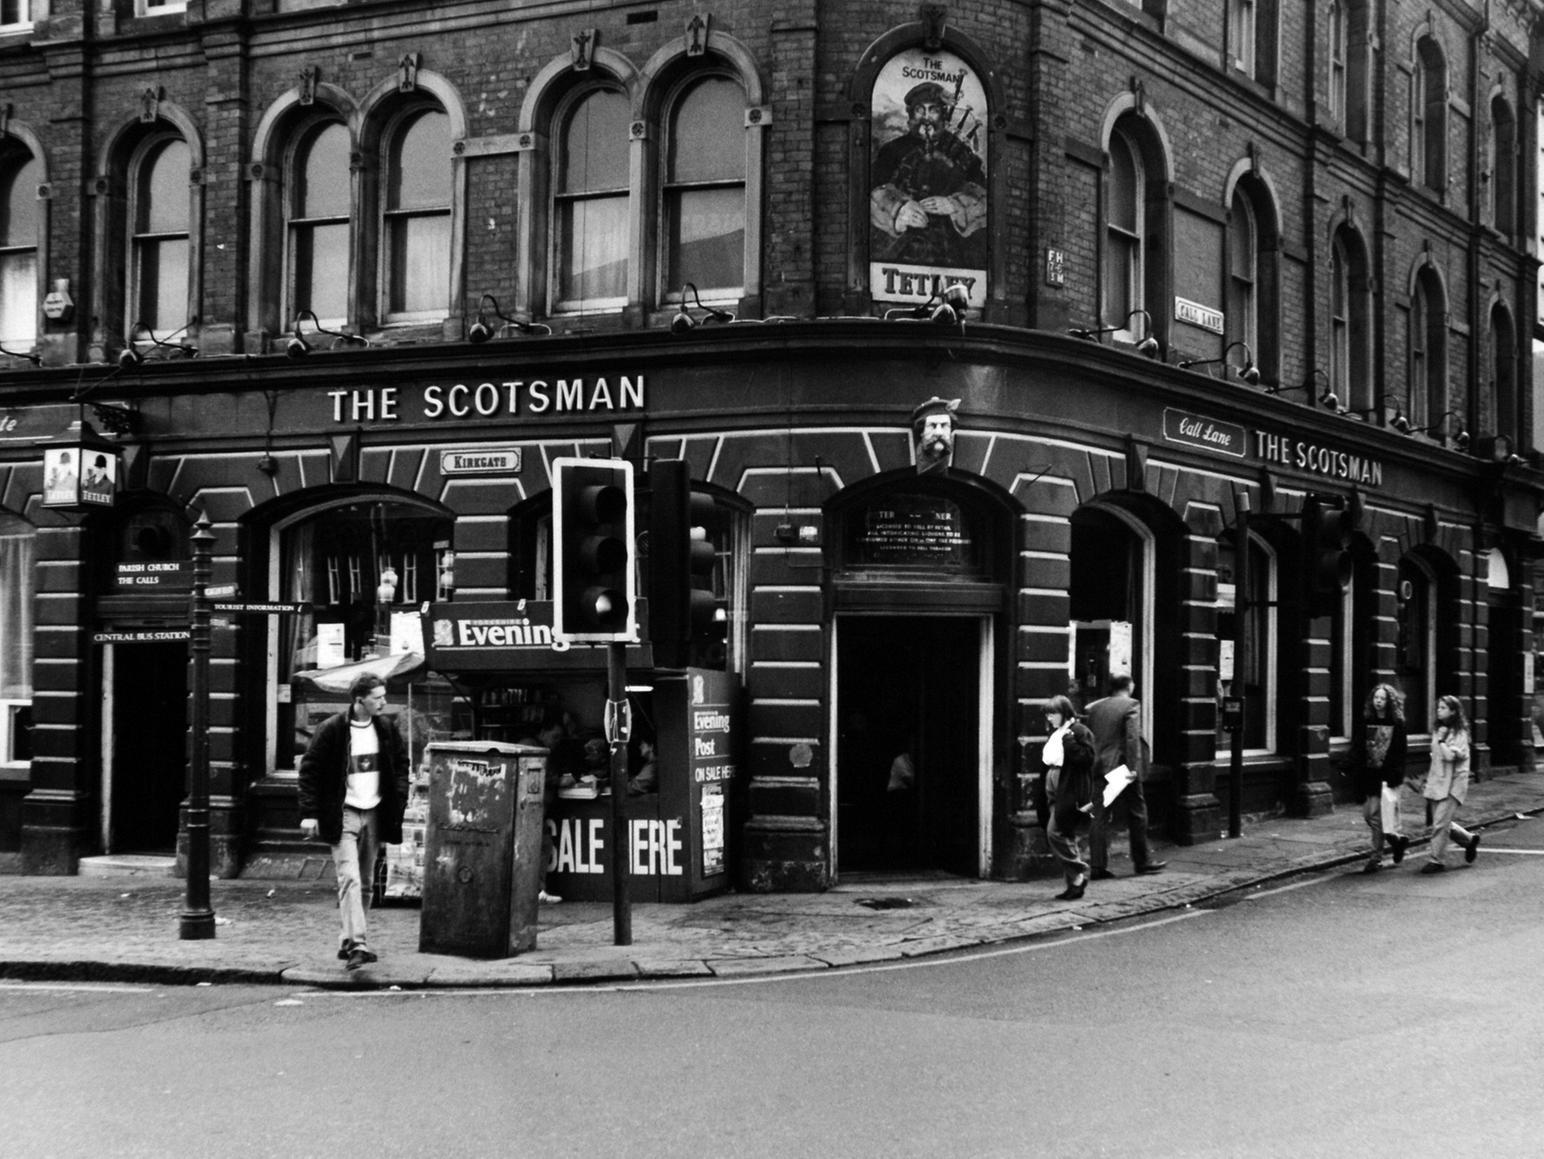 Customers at The Scotsman in Leeds City Centre are organising a petition objecting to Tetleys plan to sell the pub to an amusement arcade.